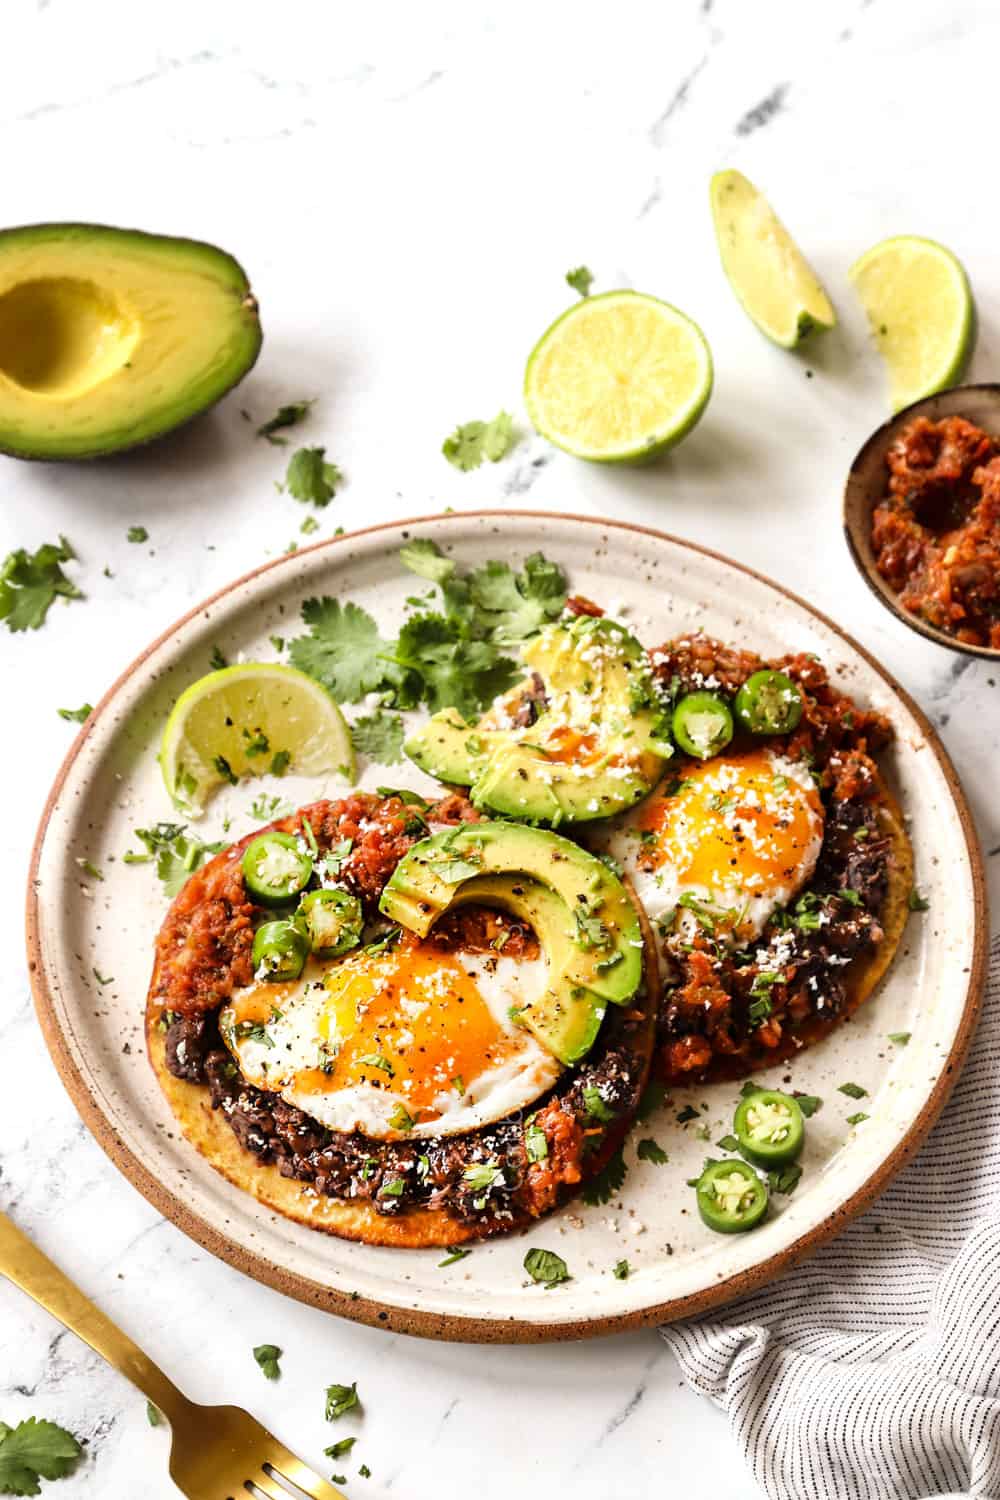 two huevos rancheros on a plate topped with avocados, sliced avocados, Cotija cheese and hot sauce 